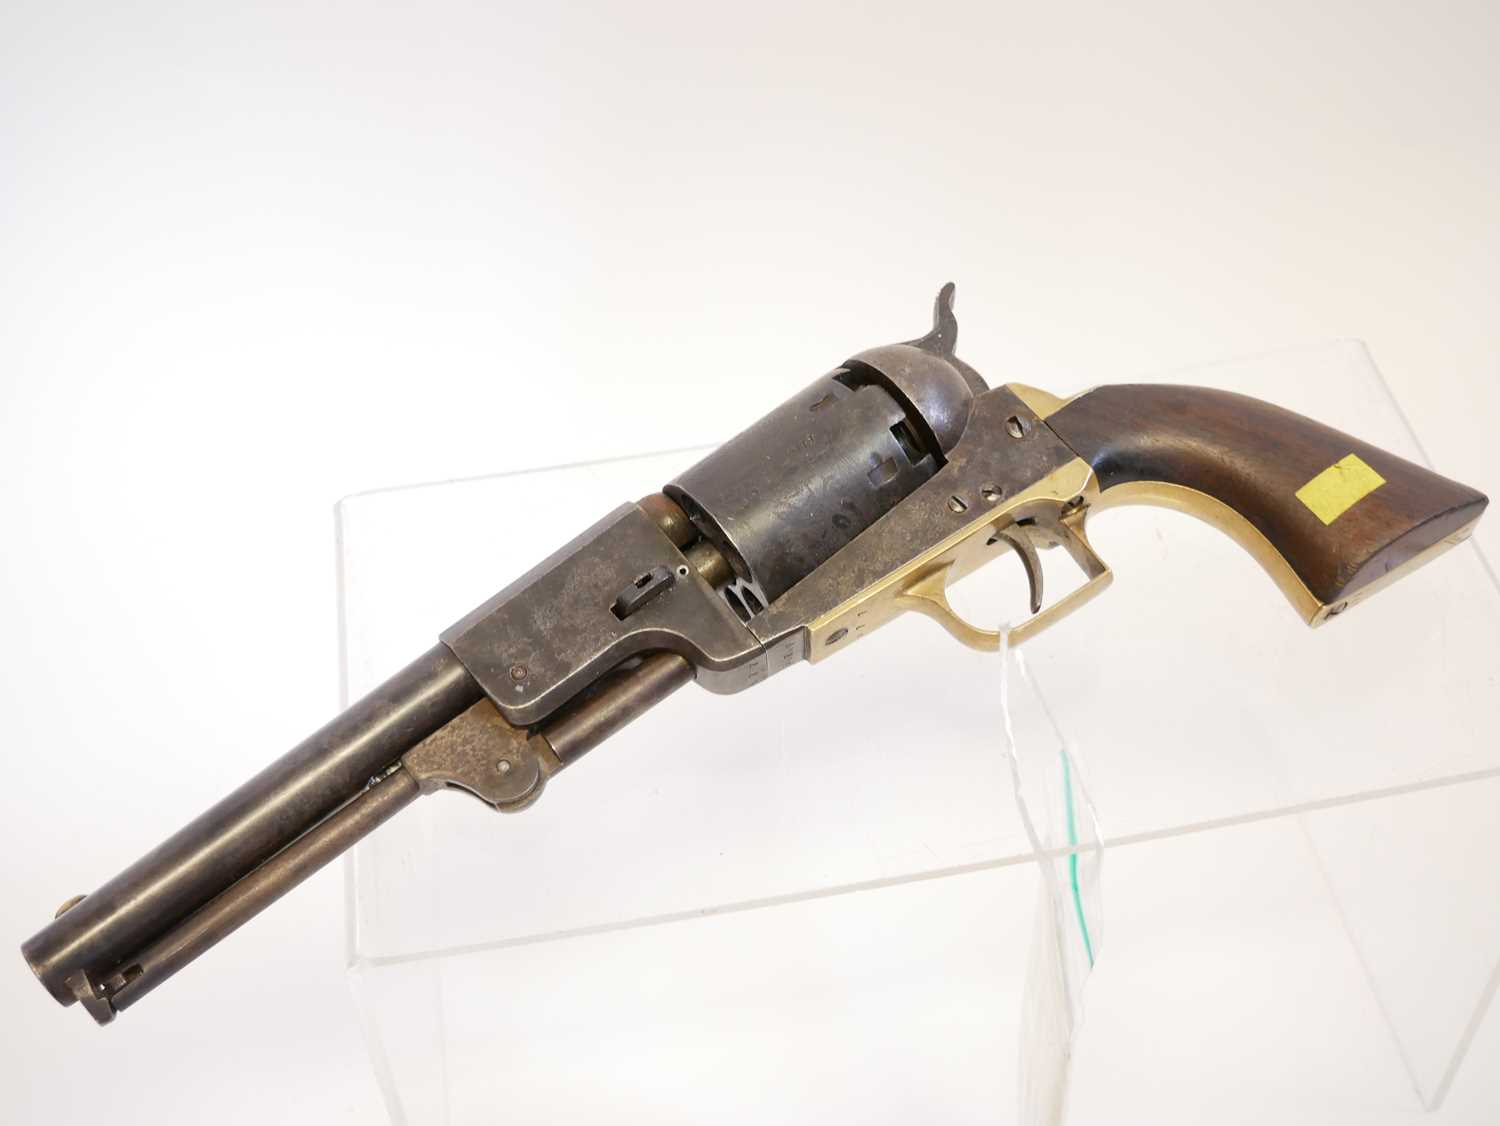 Deactivated Italian copy of a Colt dragoon, 7.5inch barrel, serial number 977, in oak case - Image 5 of 9